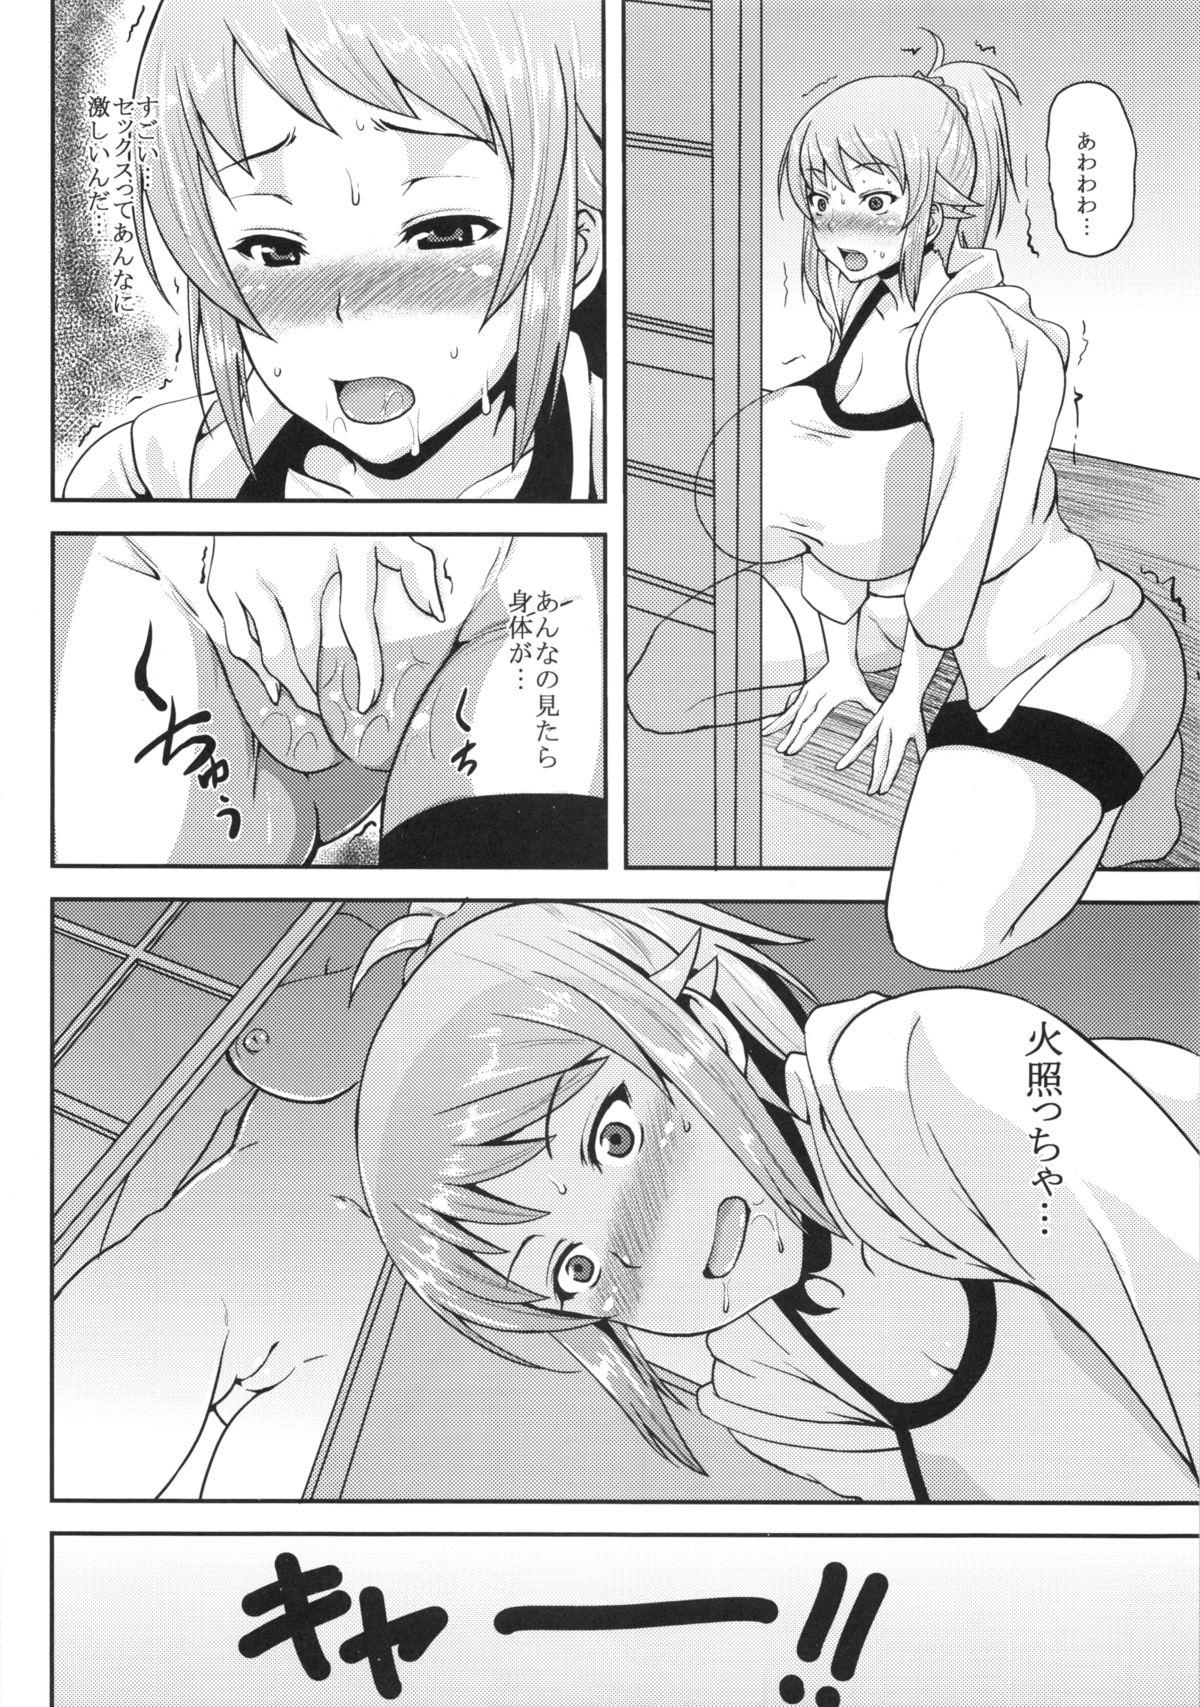 Officesex Oshiete Fumina Senpai - Gundam build fighters try Blowjob Porn - Page 7